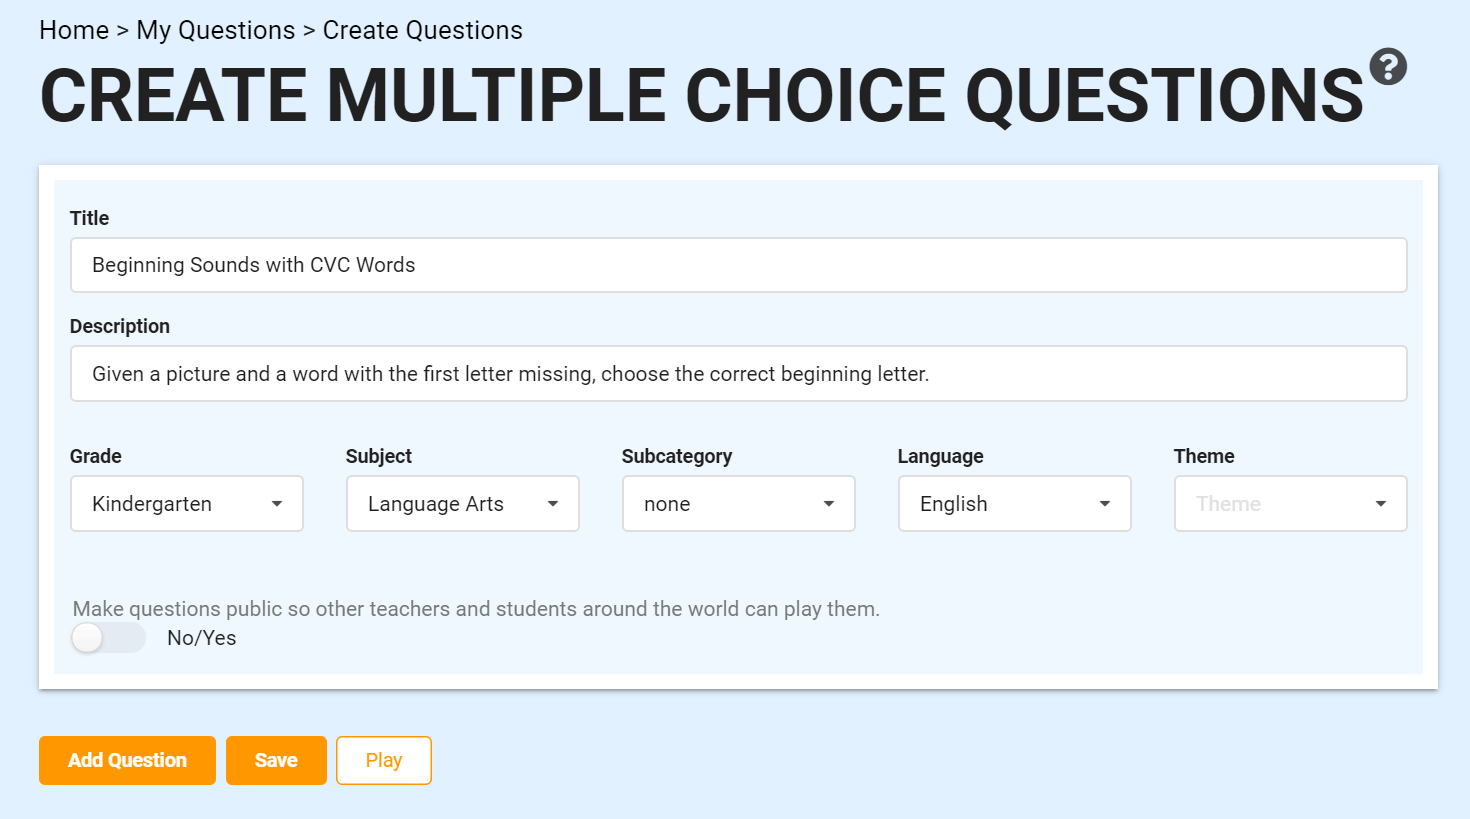 create-questions-multiple-choice-title.gif